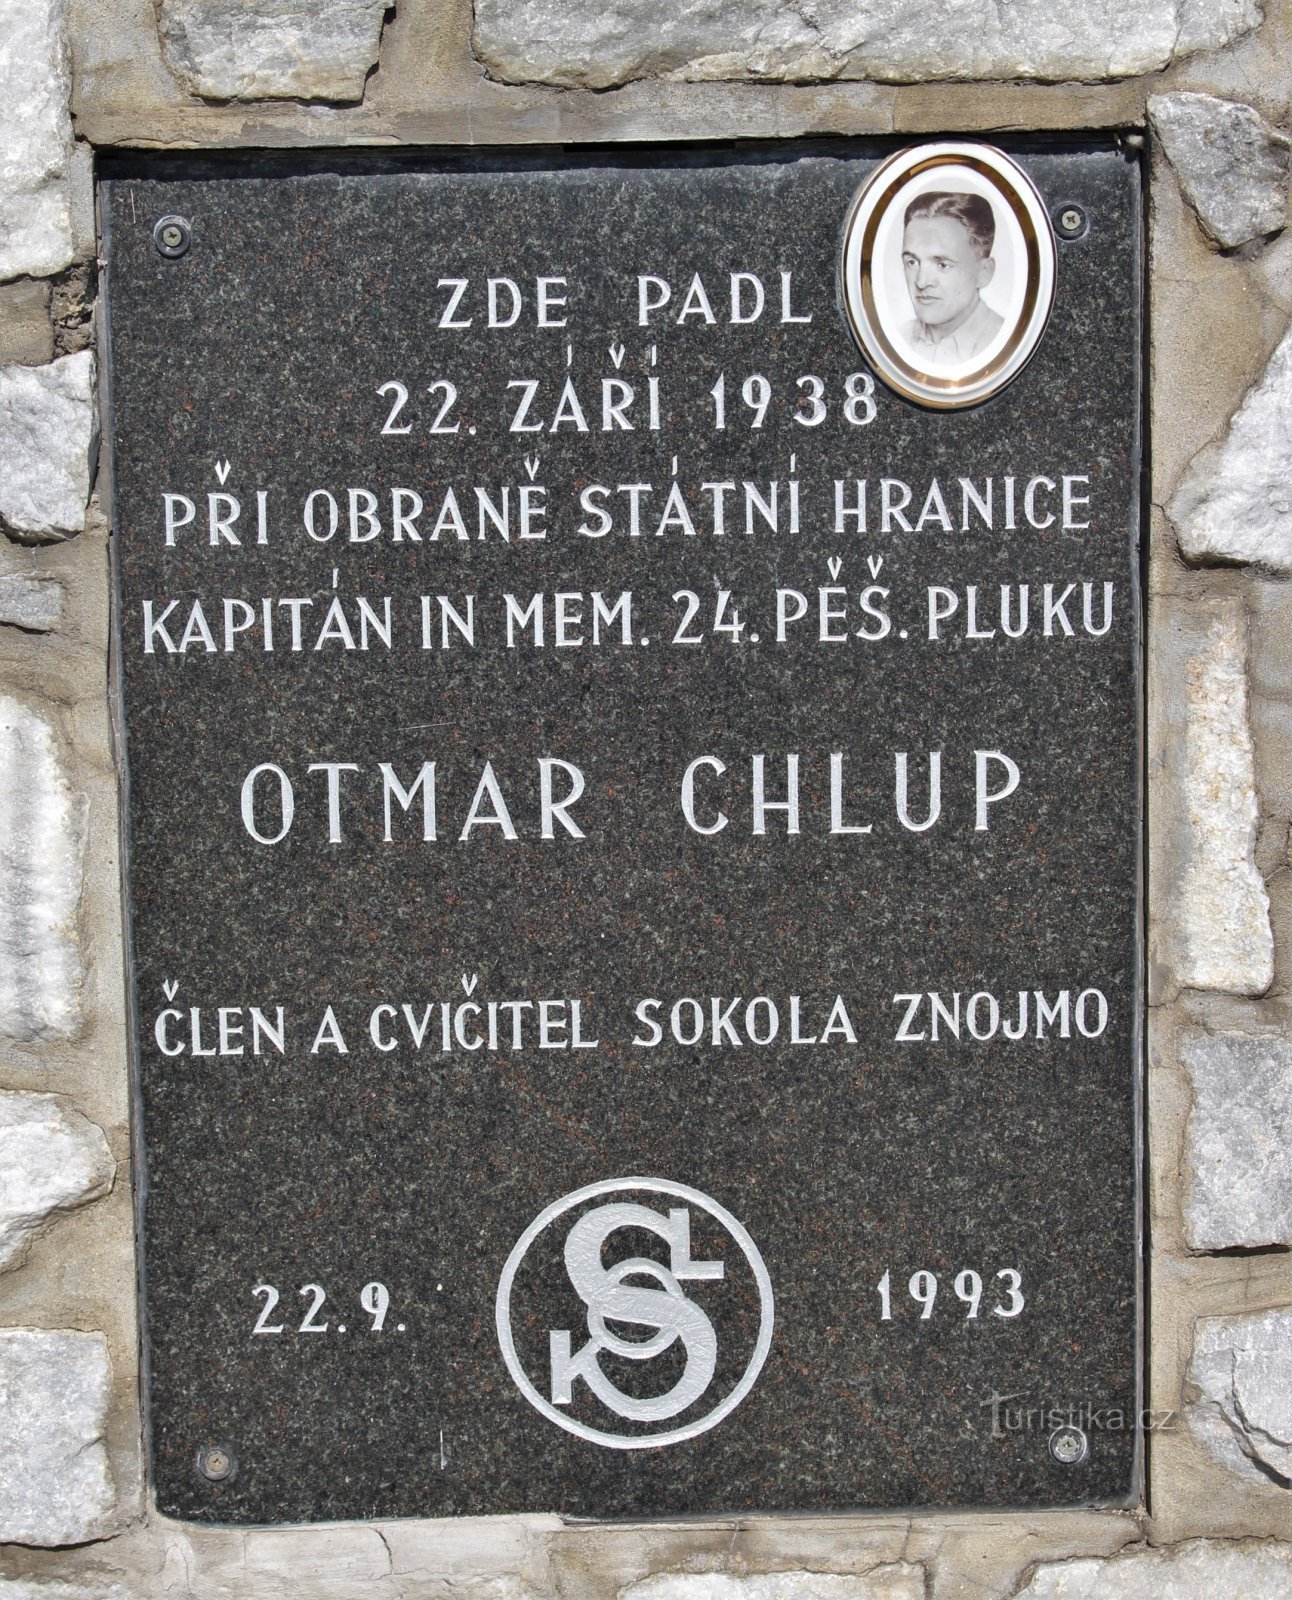 Text on plaque